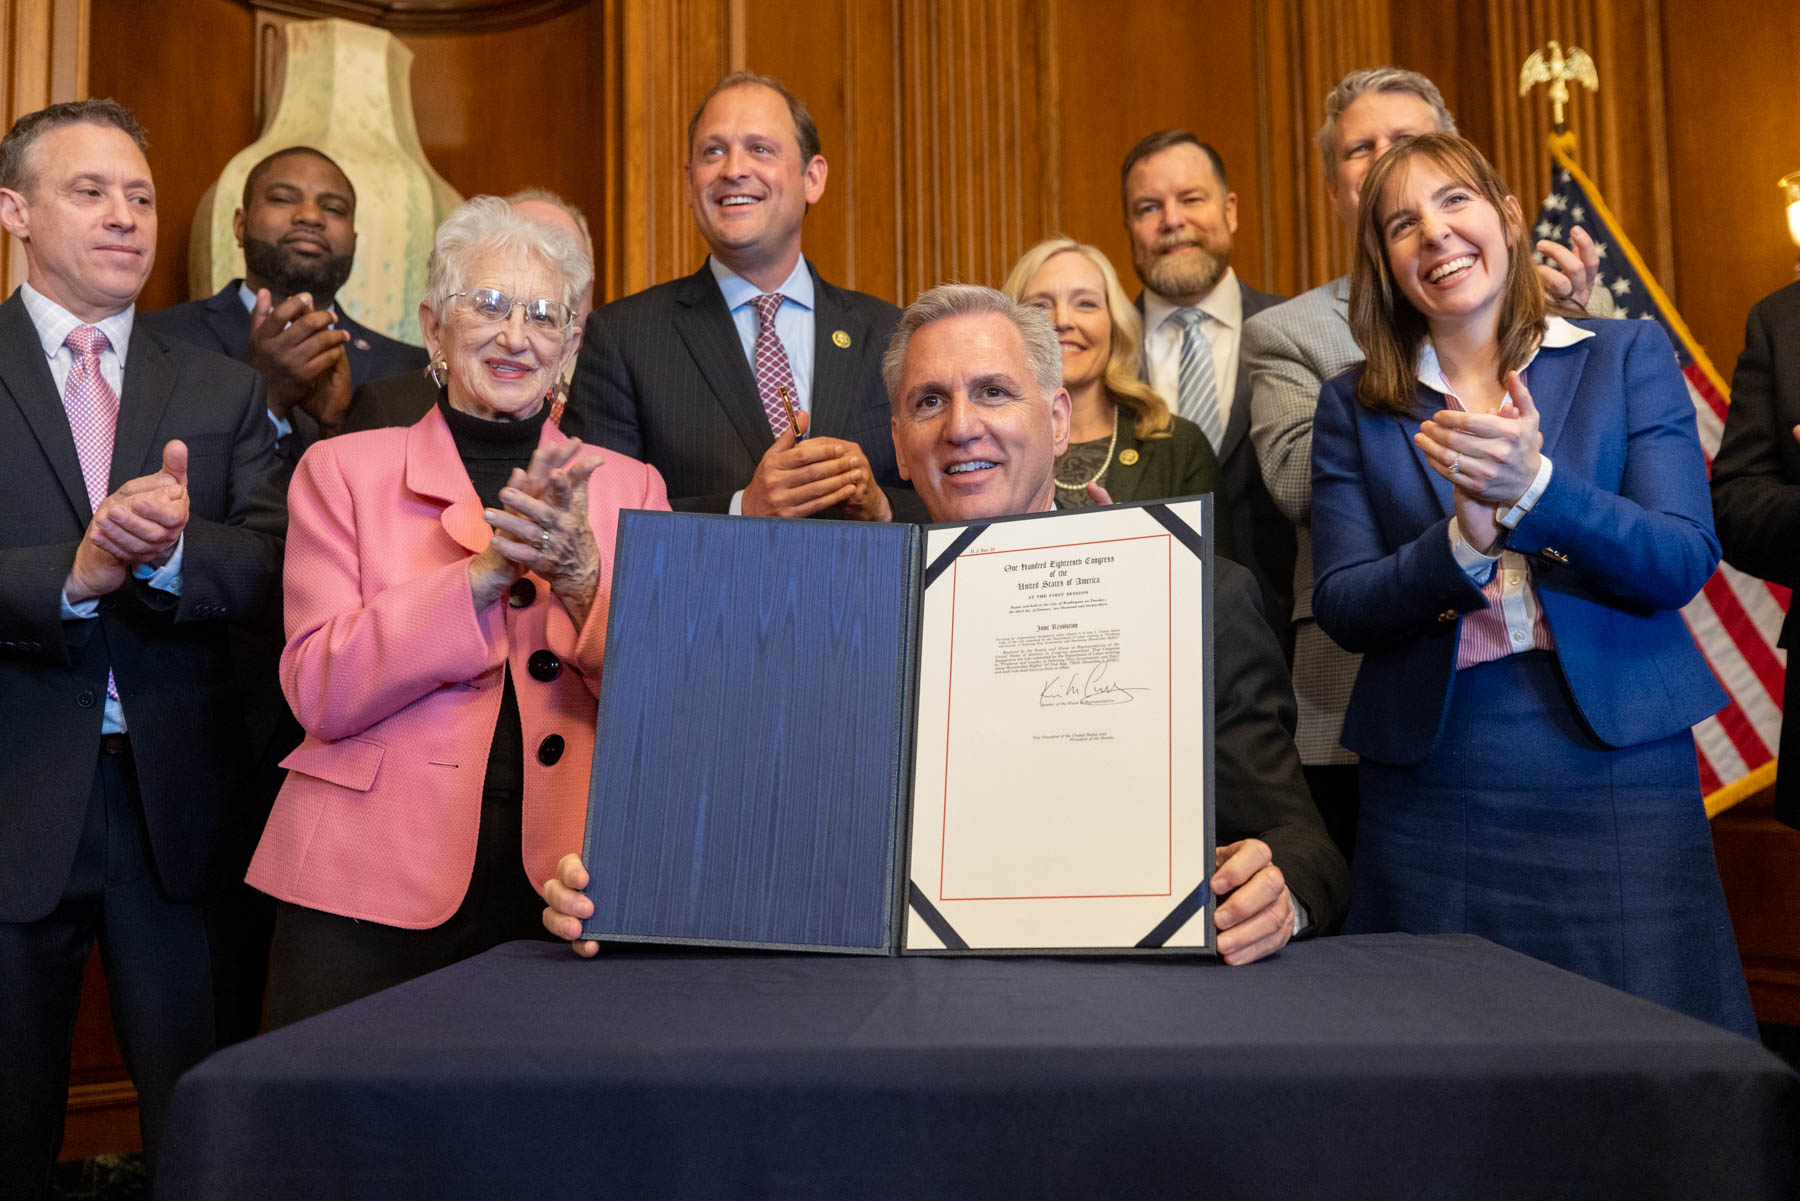 A photo of House Speaker Kevin McCarthy holding up a signed bill at a table surrounded by lawmakers.